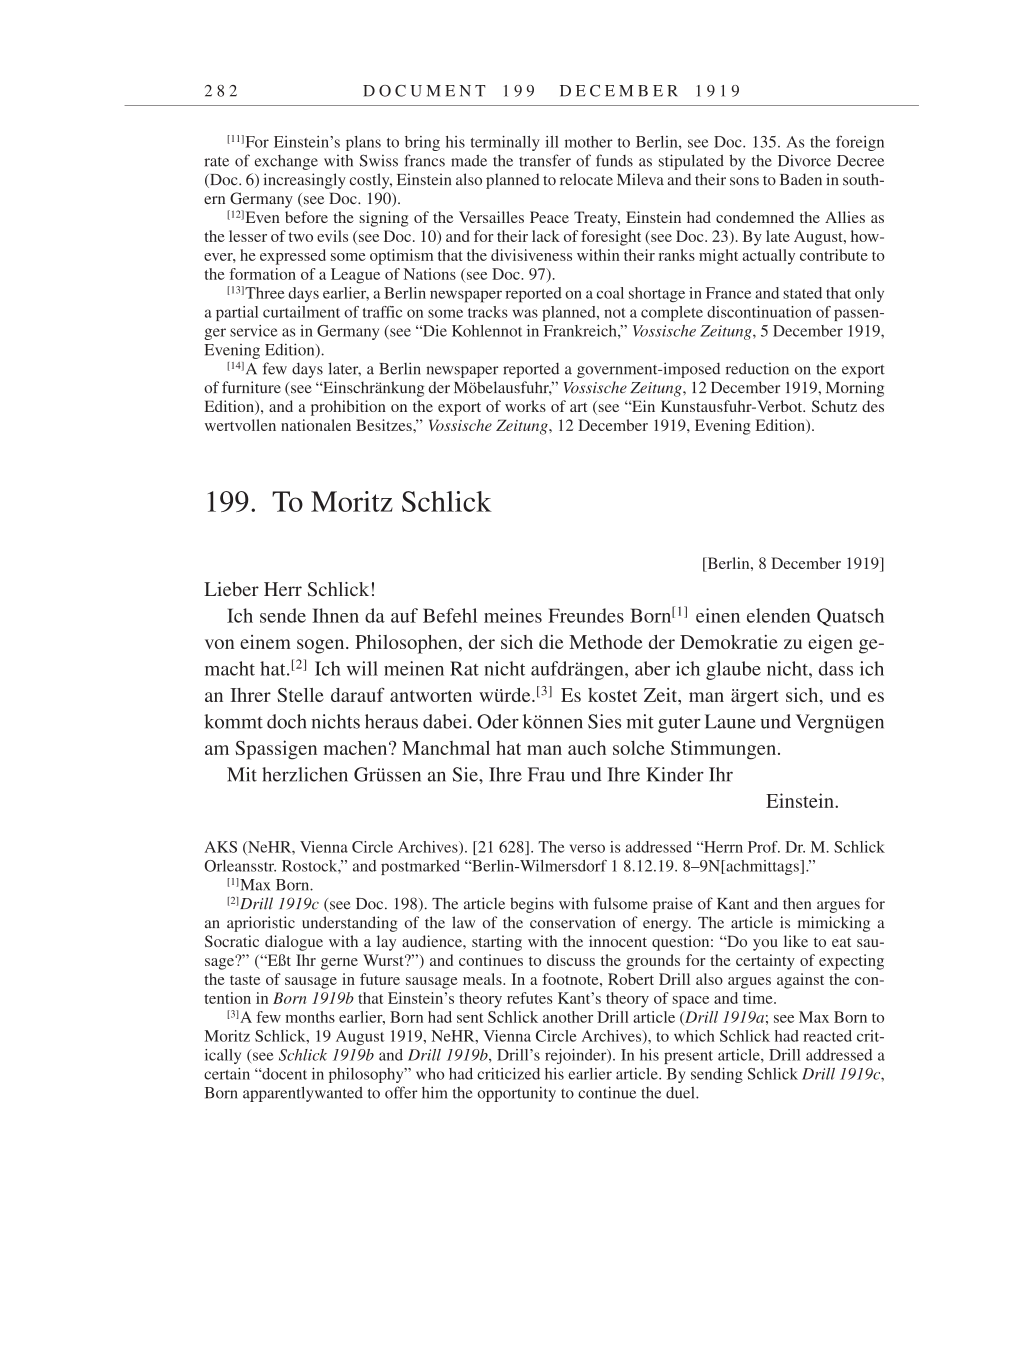 Volume 9: The Berlin Years: Correspondence January 1919-April 1920 page 282